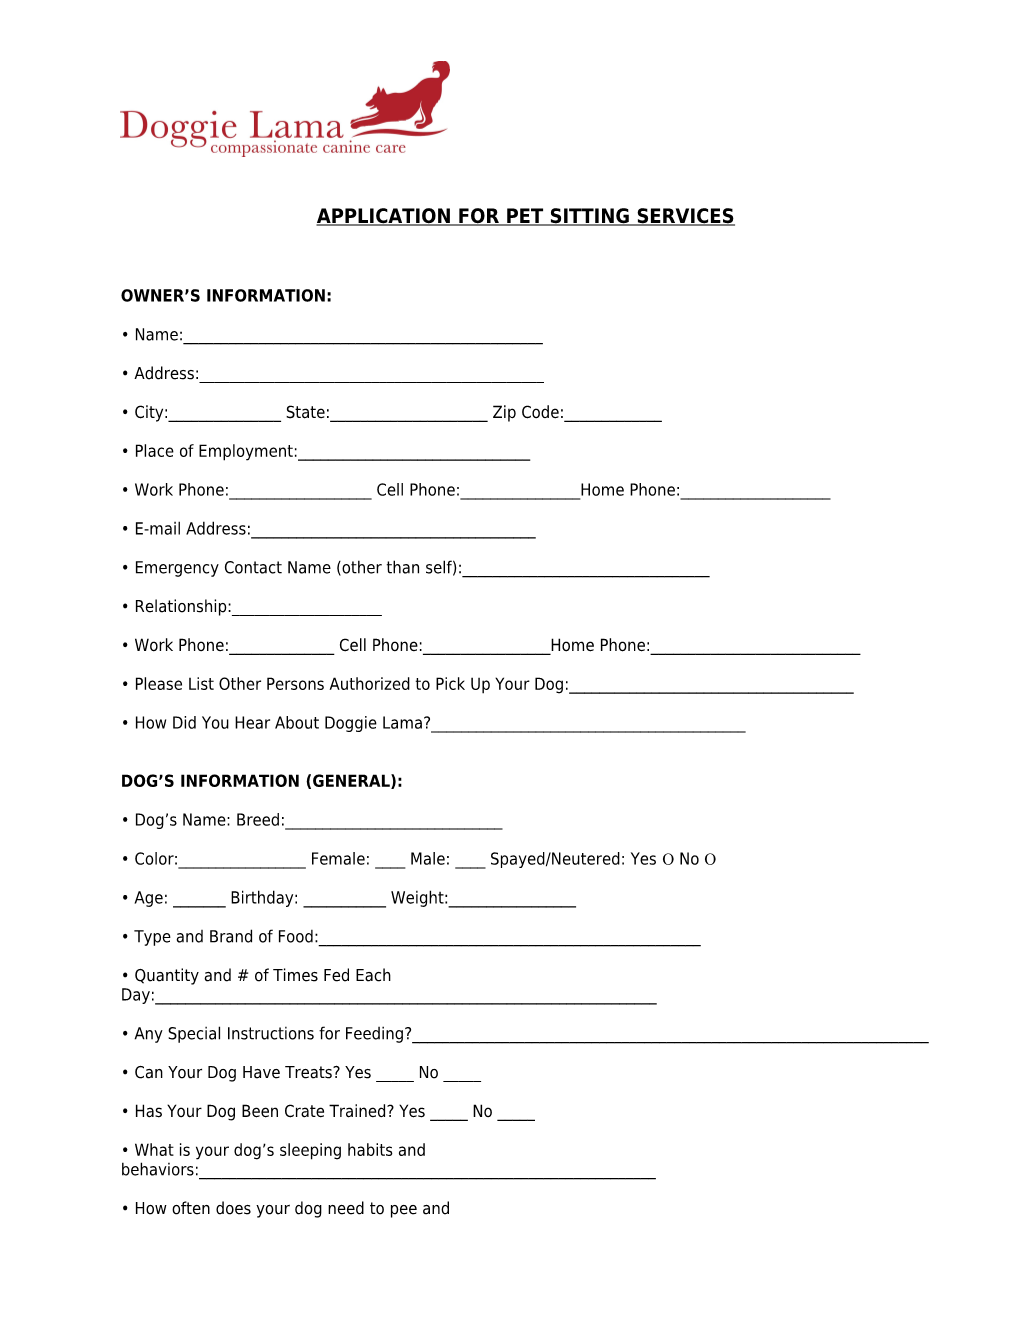 Application for Pet Sitting Services